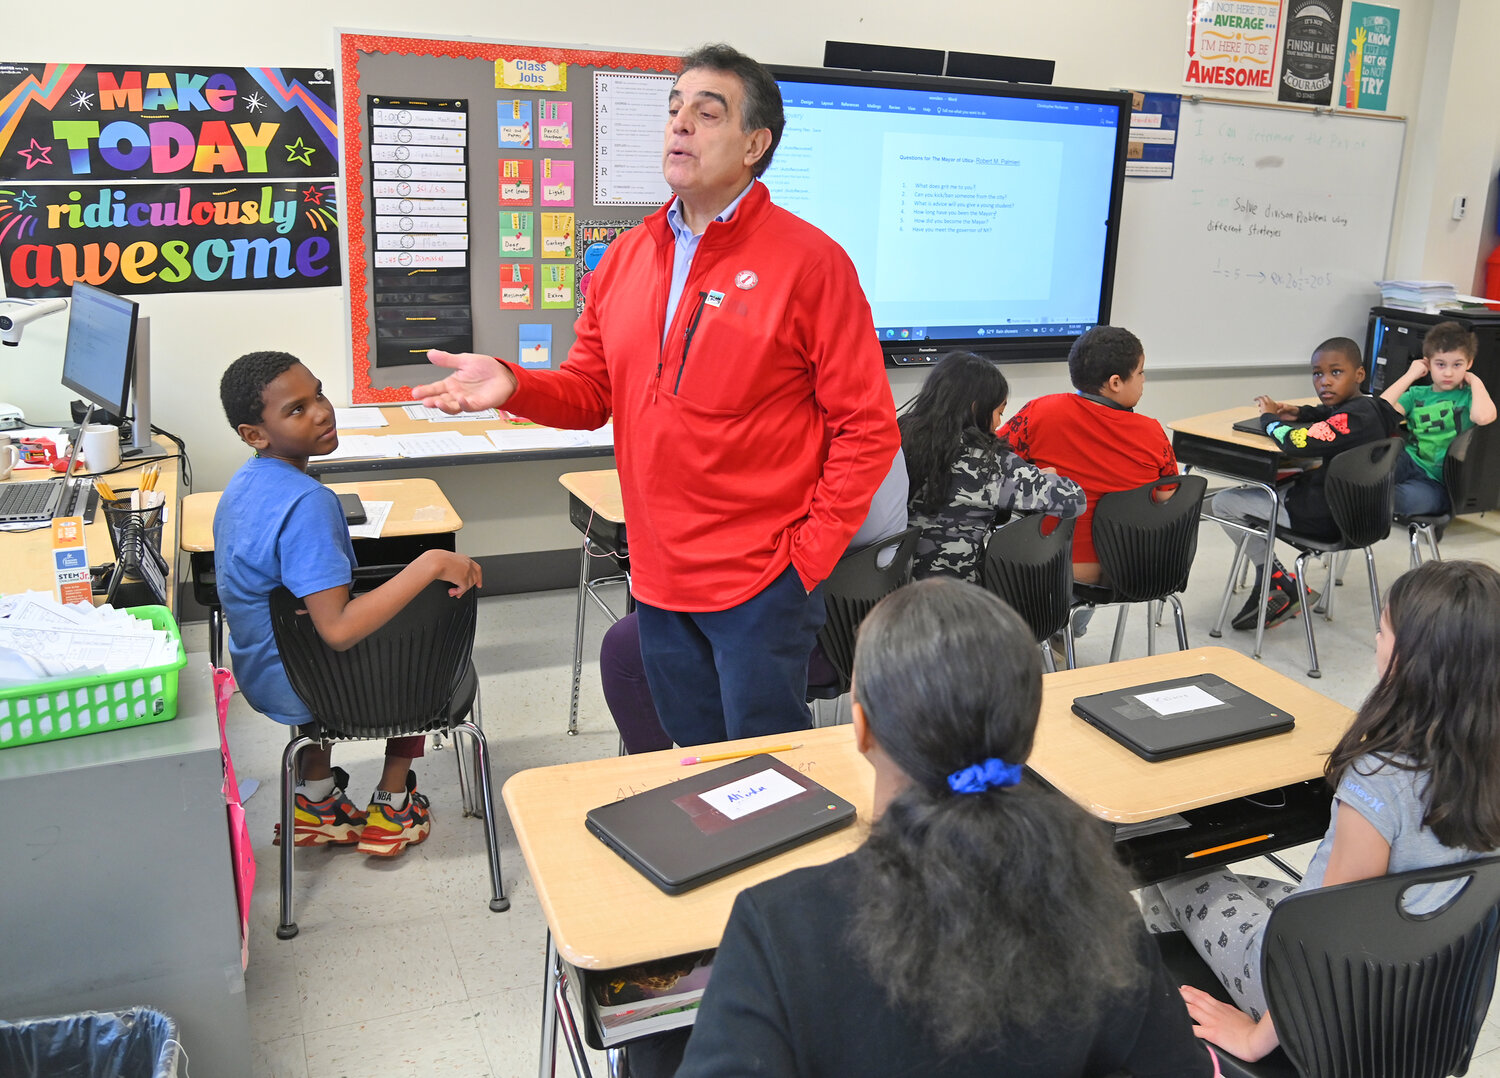 Utica Mayor Robert Palmieri talks with a class Friday, March 24 during the Community Reader's Day event at Kernan Elementary School in Utica.